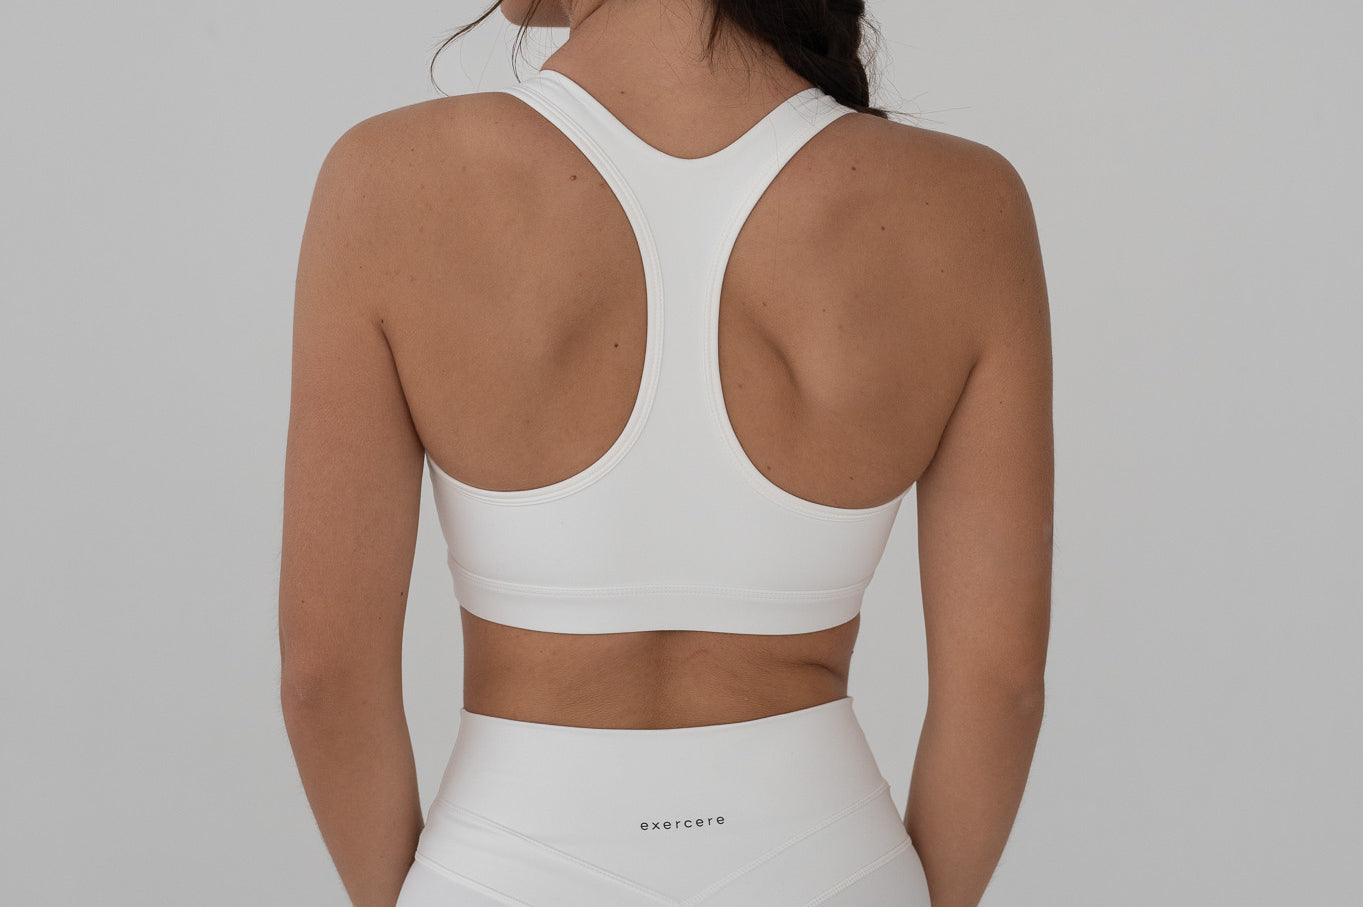 CW-X SA on X: Investing in a good sports bra is one of the most